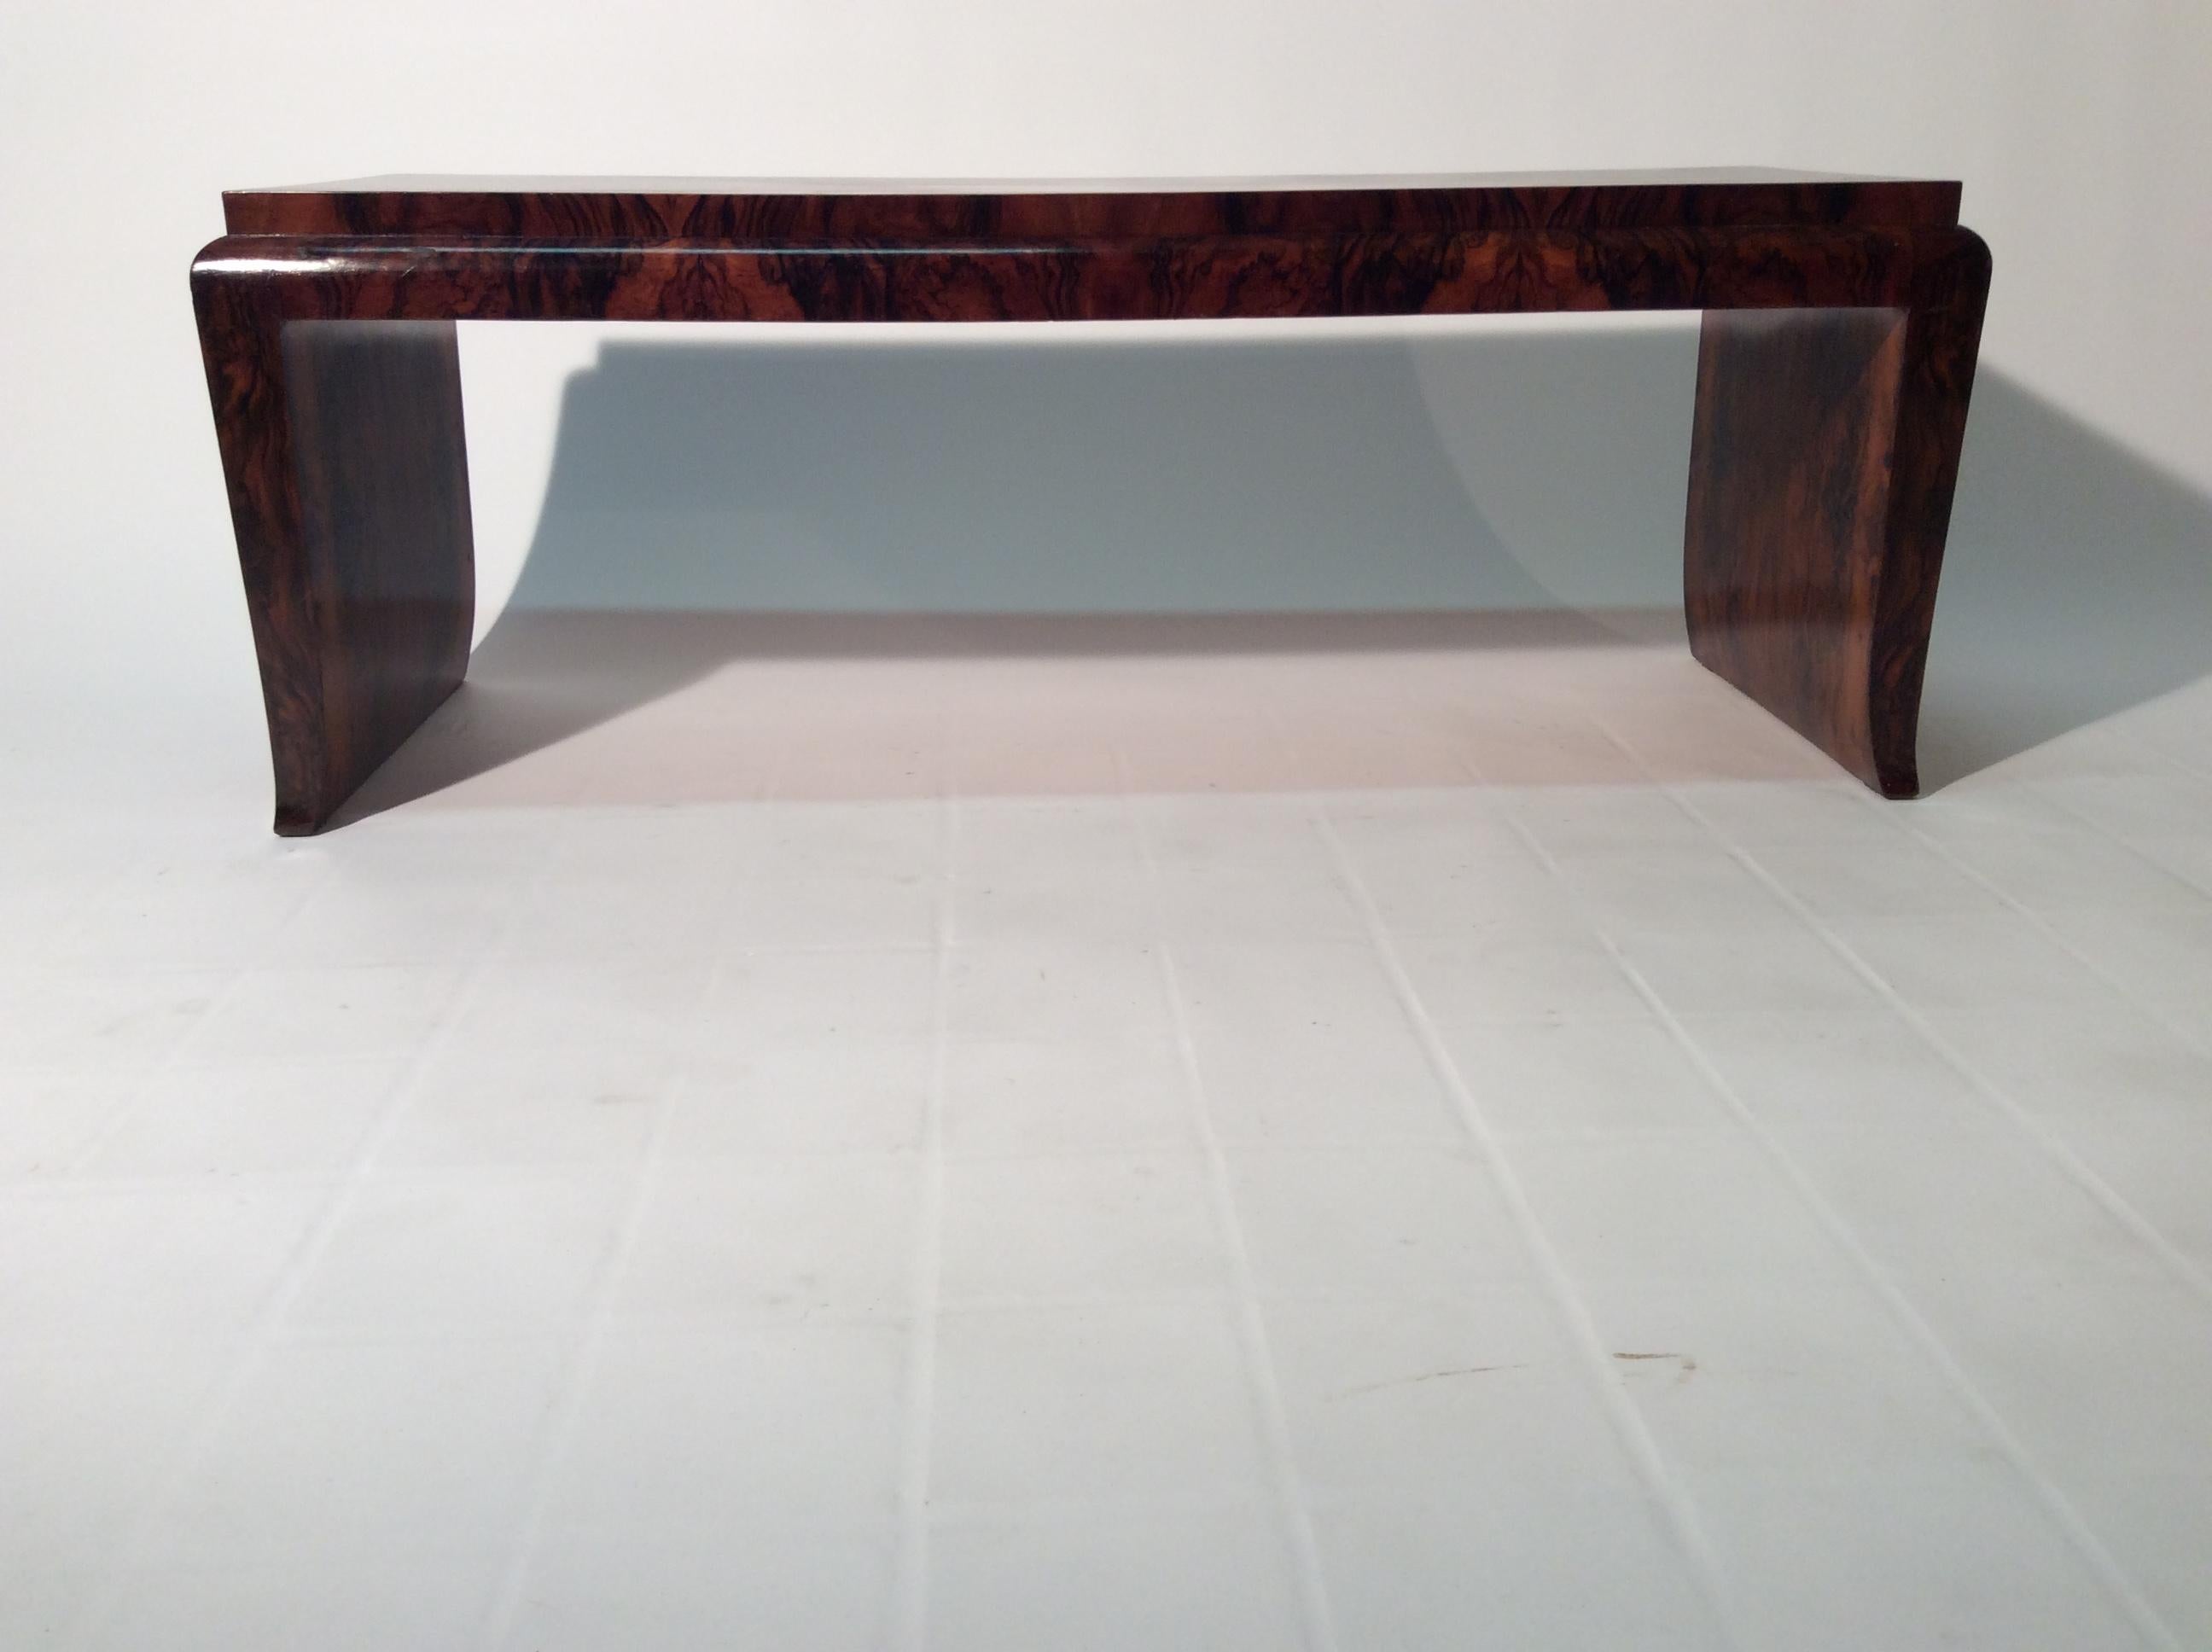 Art Deco Rectangular Coffee Table or Bench with Precious and Elegant Material 1